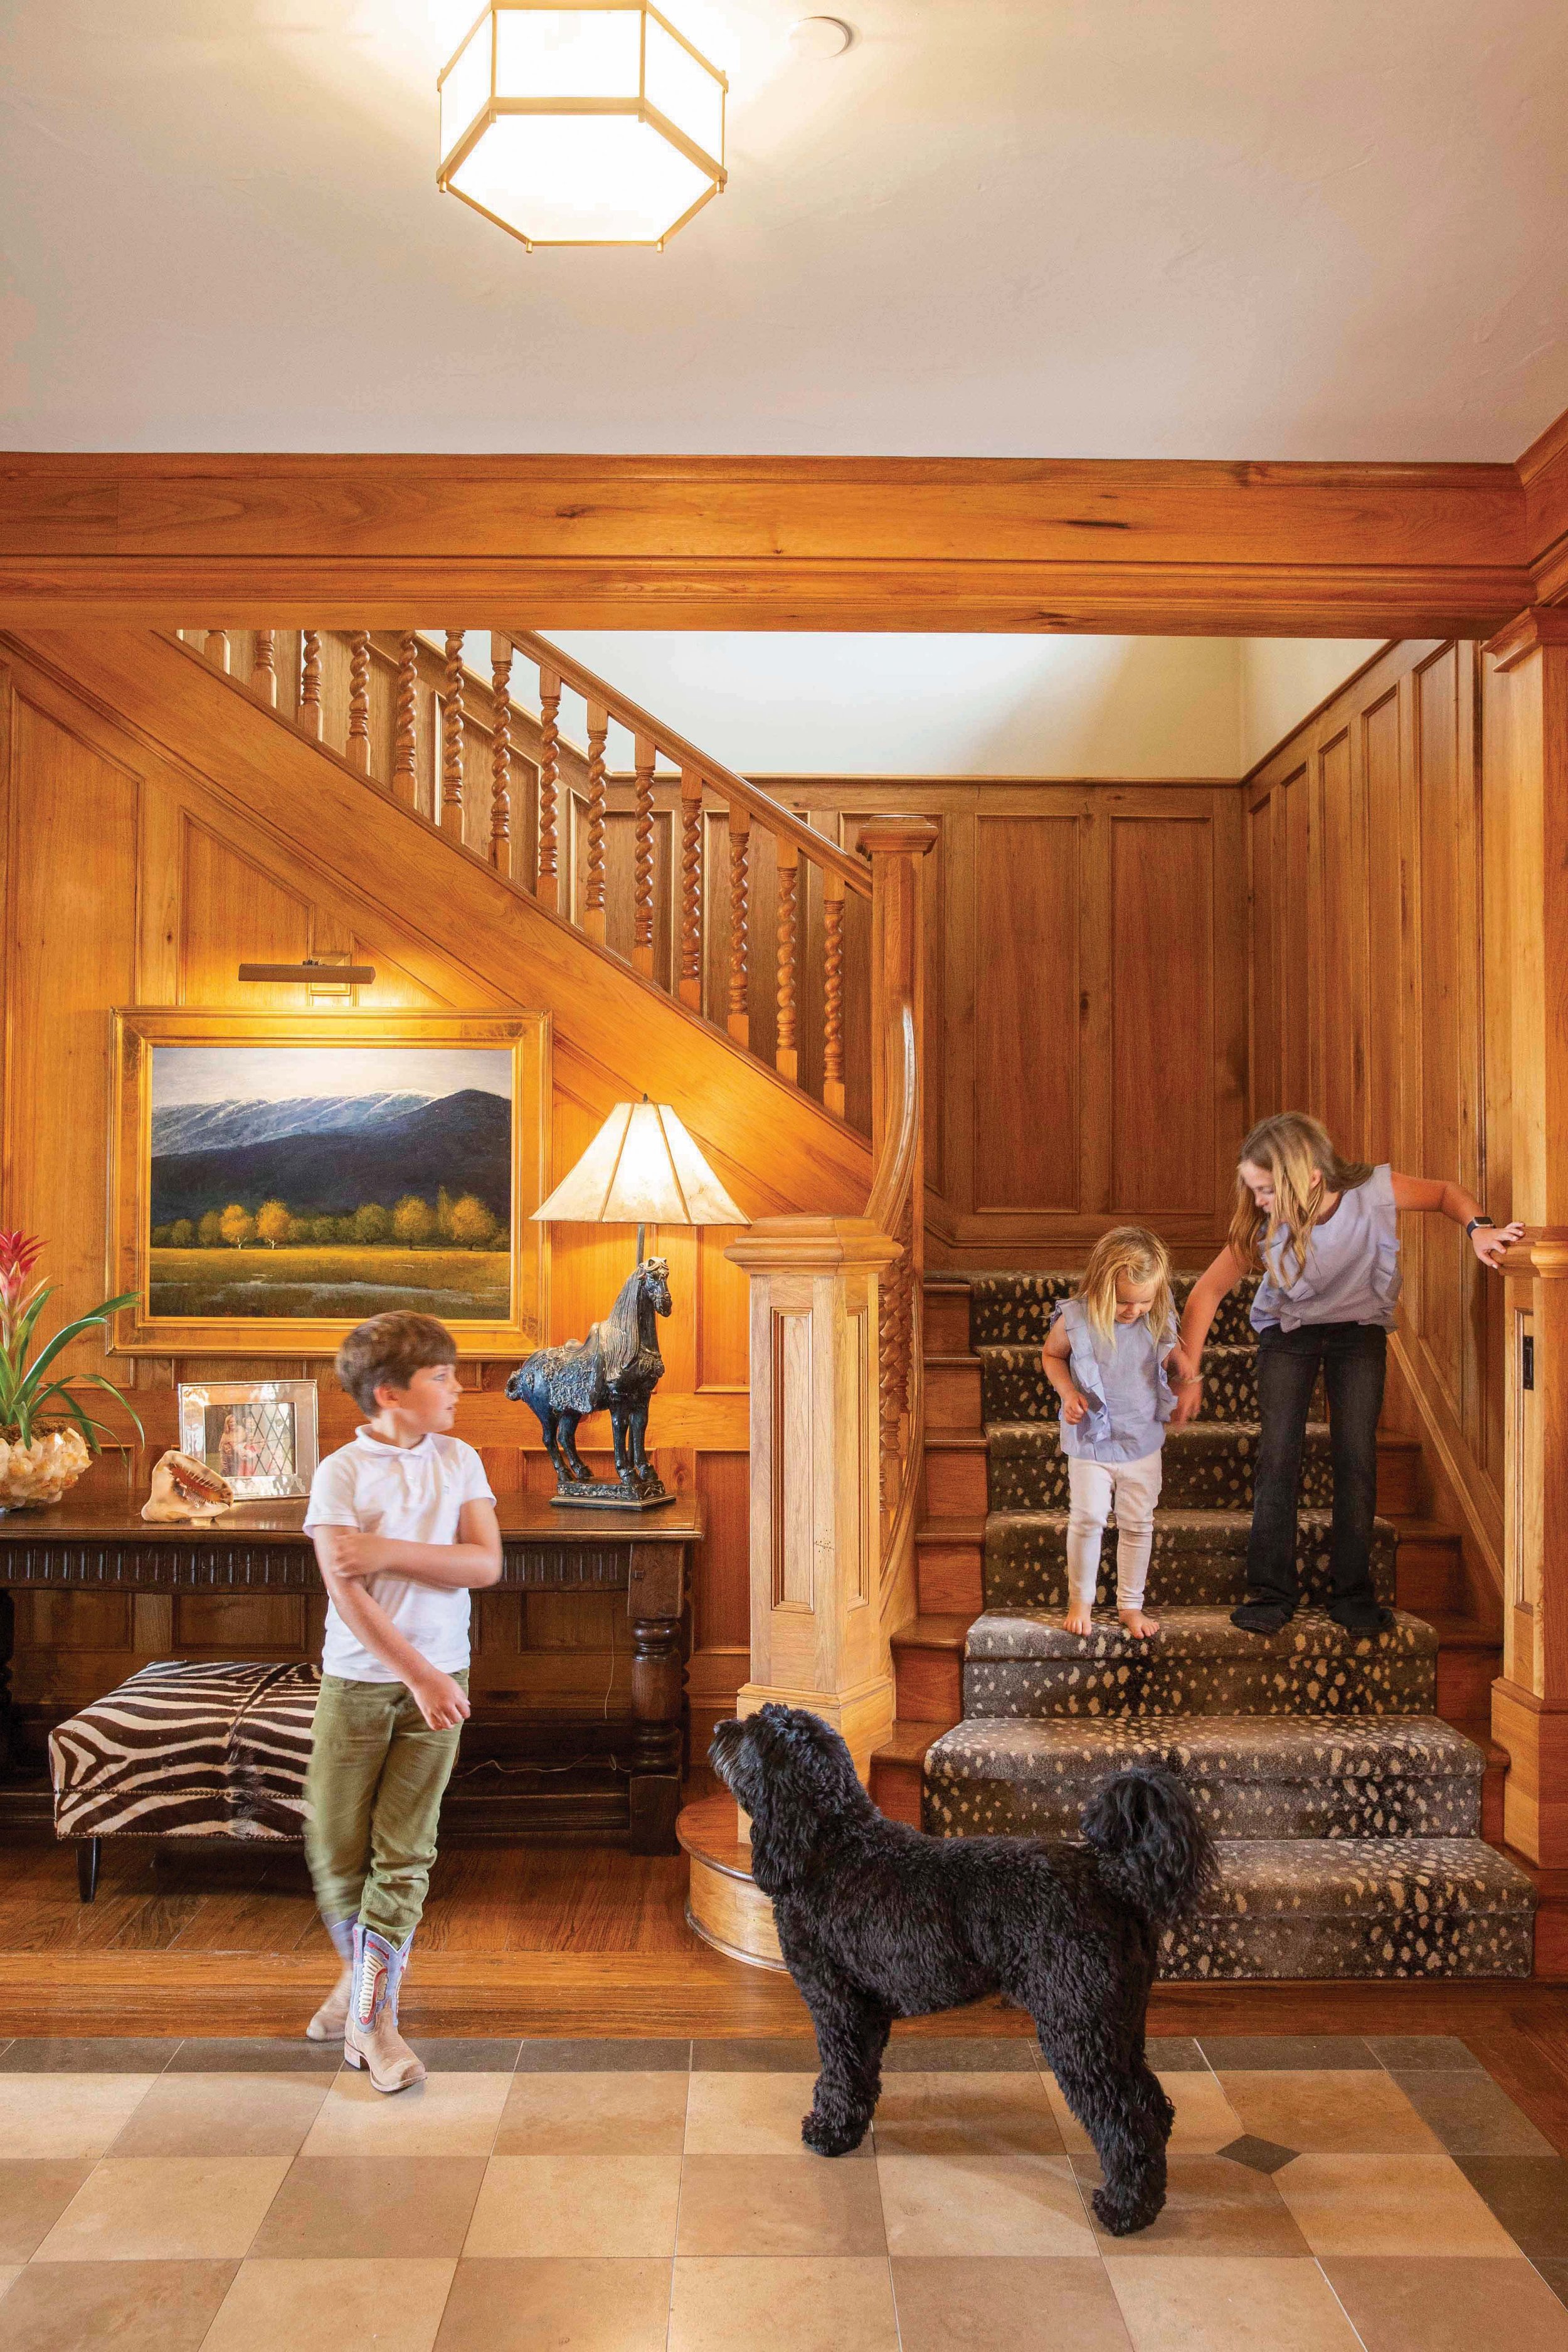  Wood paneling and an elaborate balustrade bring warmth to the oversize staircase in the ranch house. 